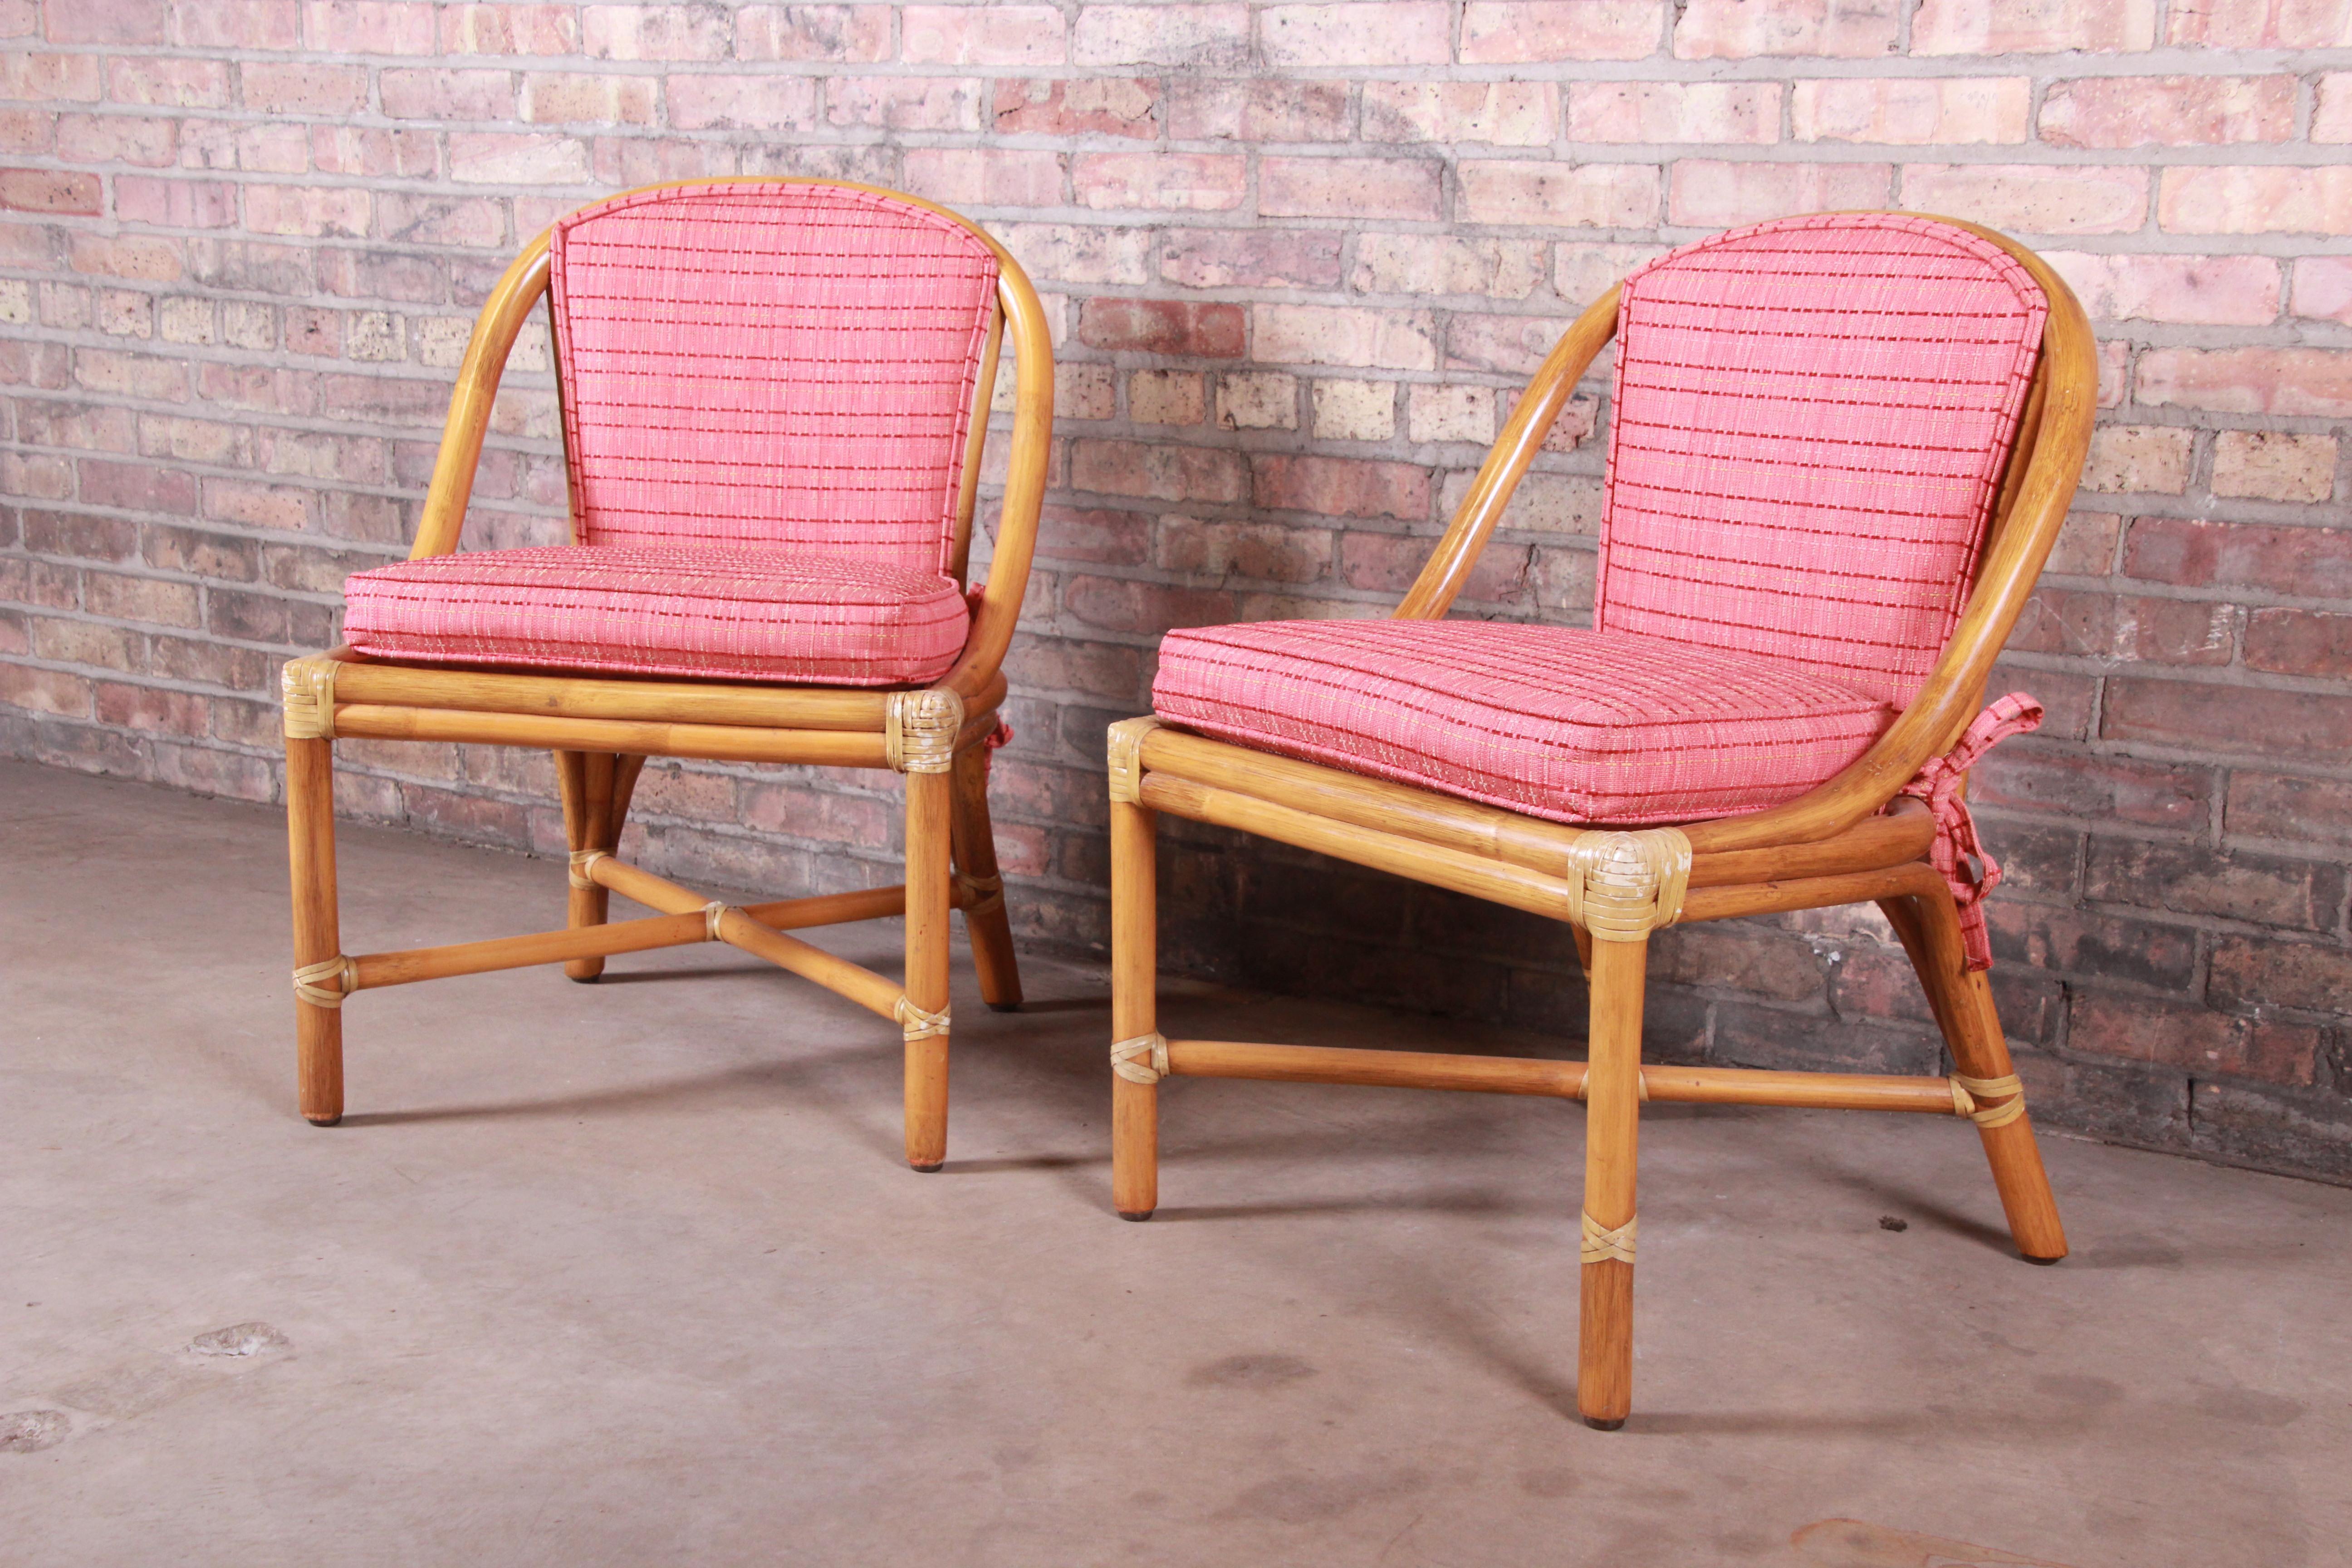 20th Century McGuire Hollywood Regency Organic Modern Bamboo Rattan Dining Chairs, Set of 4